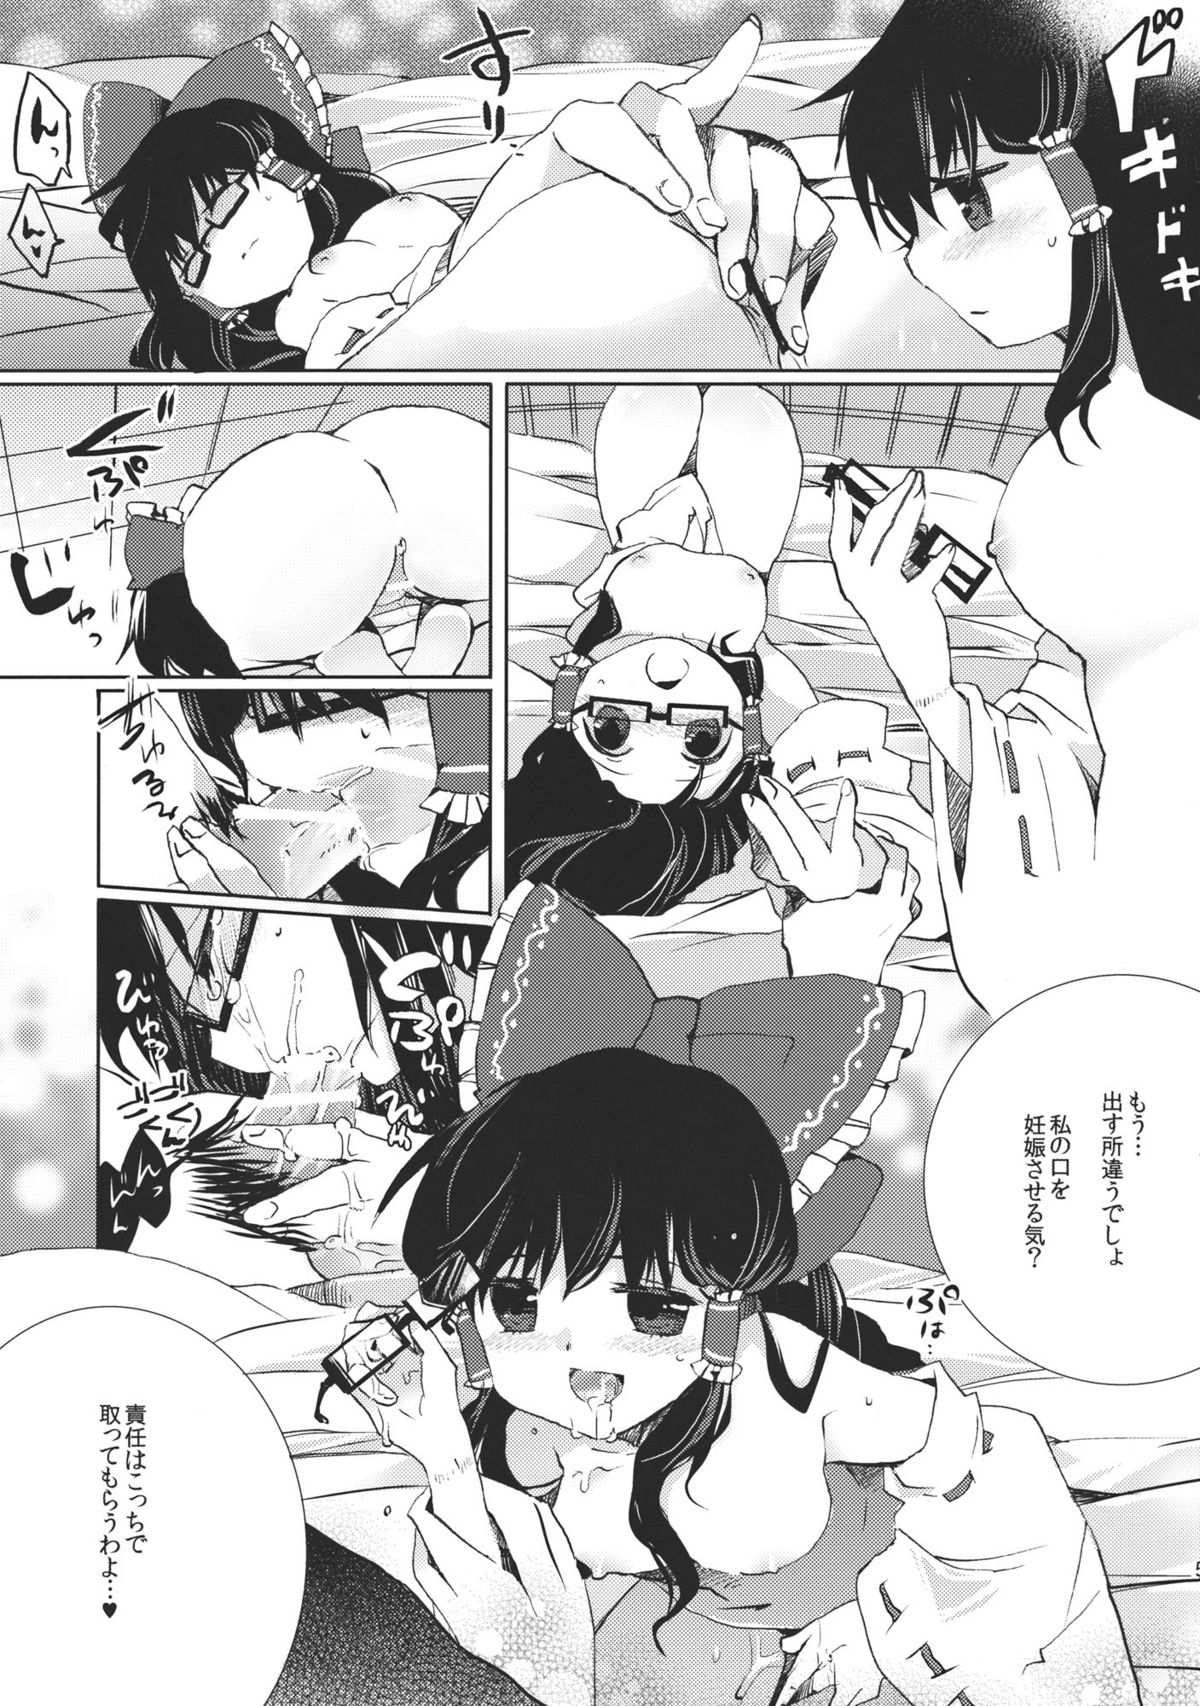 (C80) [Oimoto] Renbo Marking (Touhou Project) page 5 full